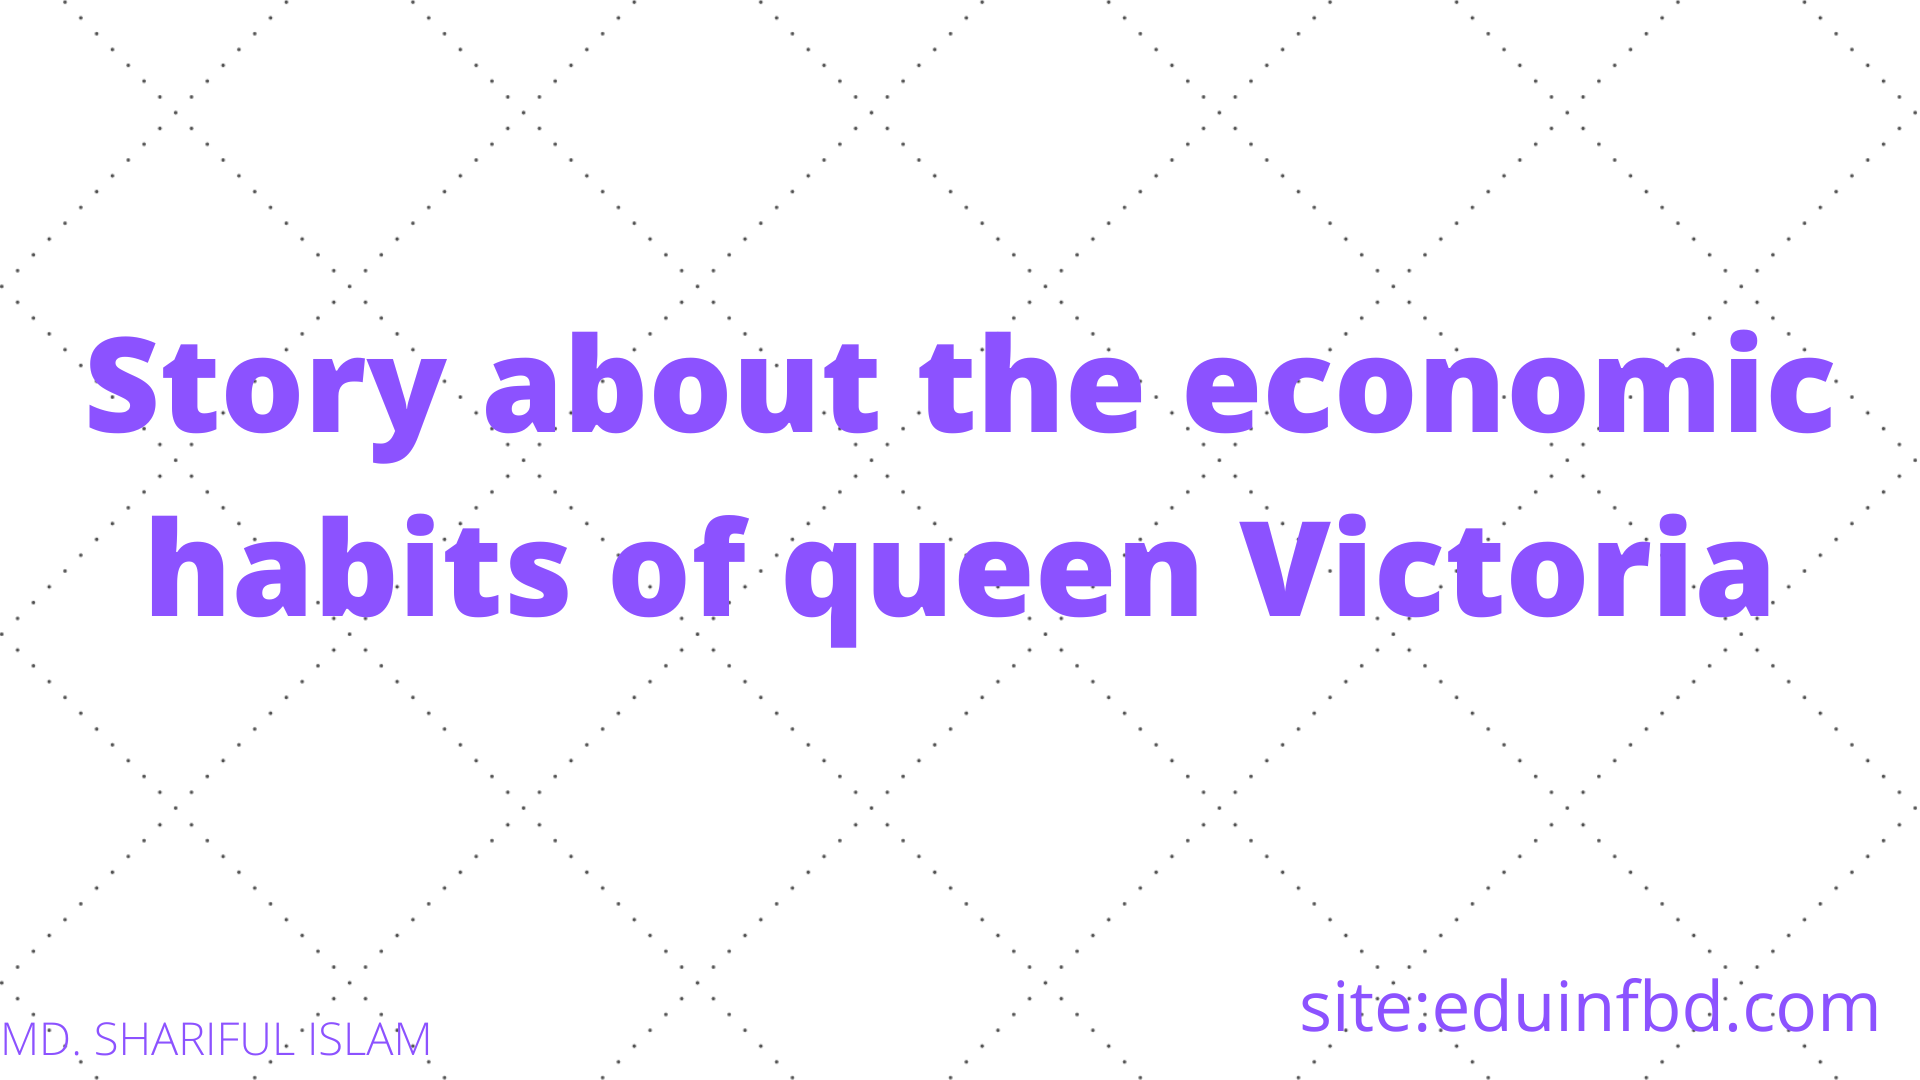 Story about the economic habits of queen Victoria